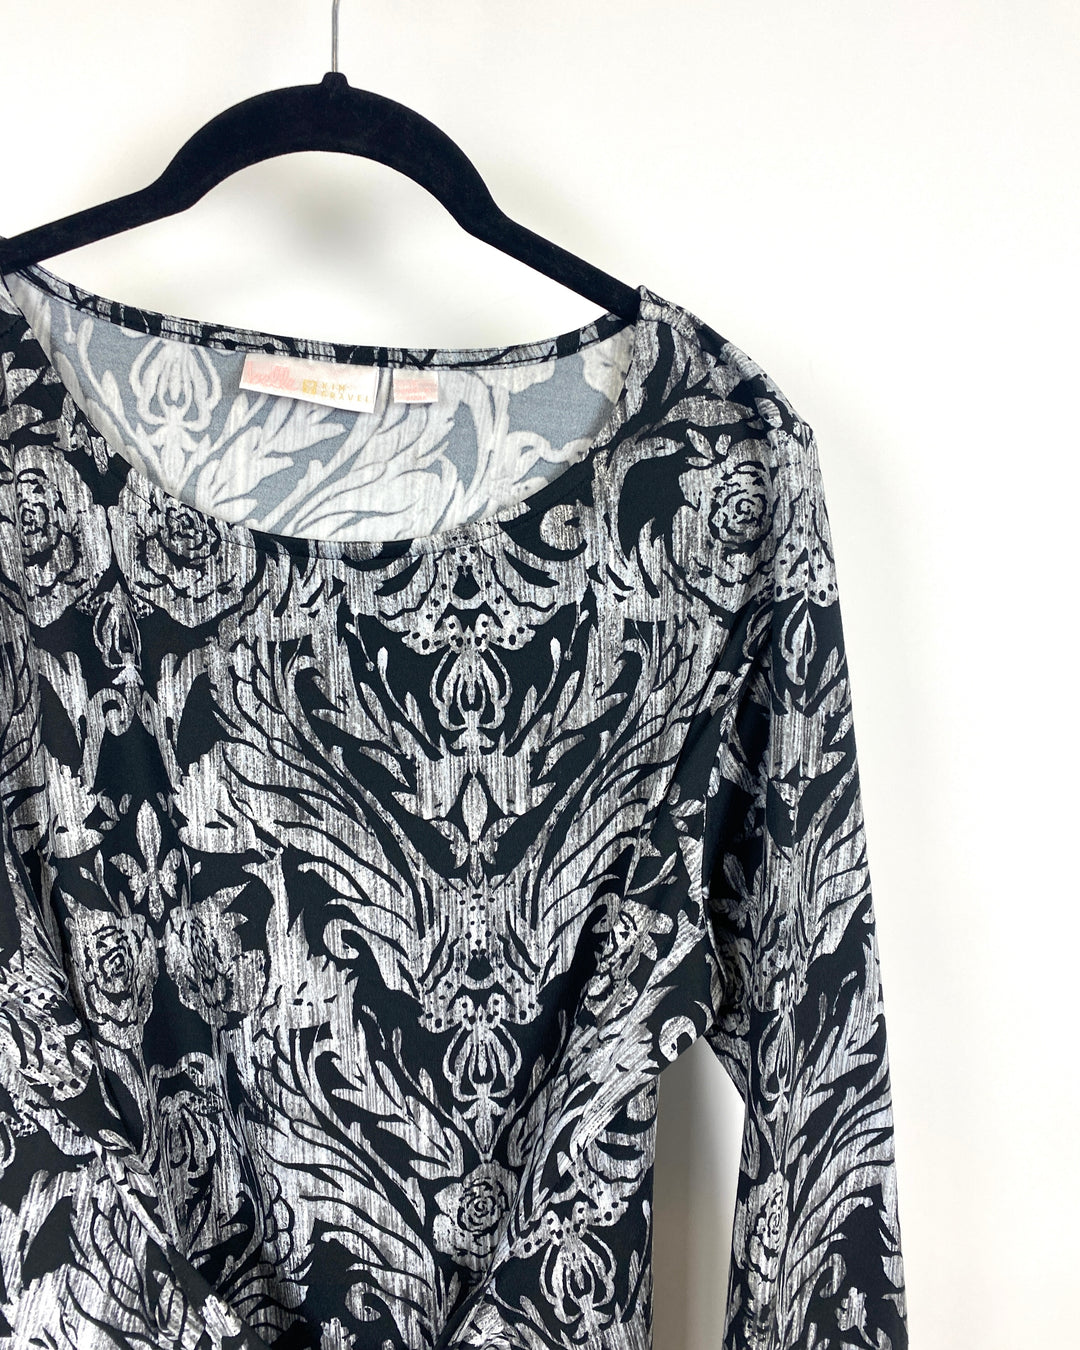 Black and Grey Floral Top - Large/Extra Large